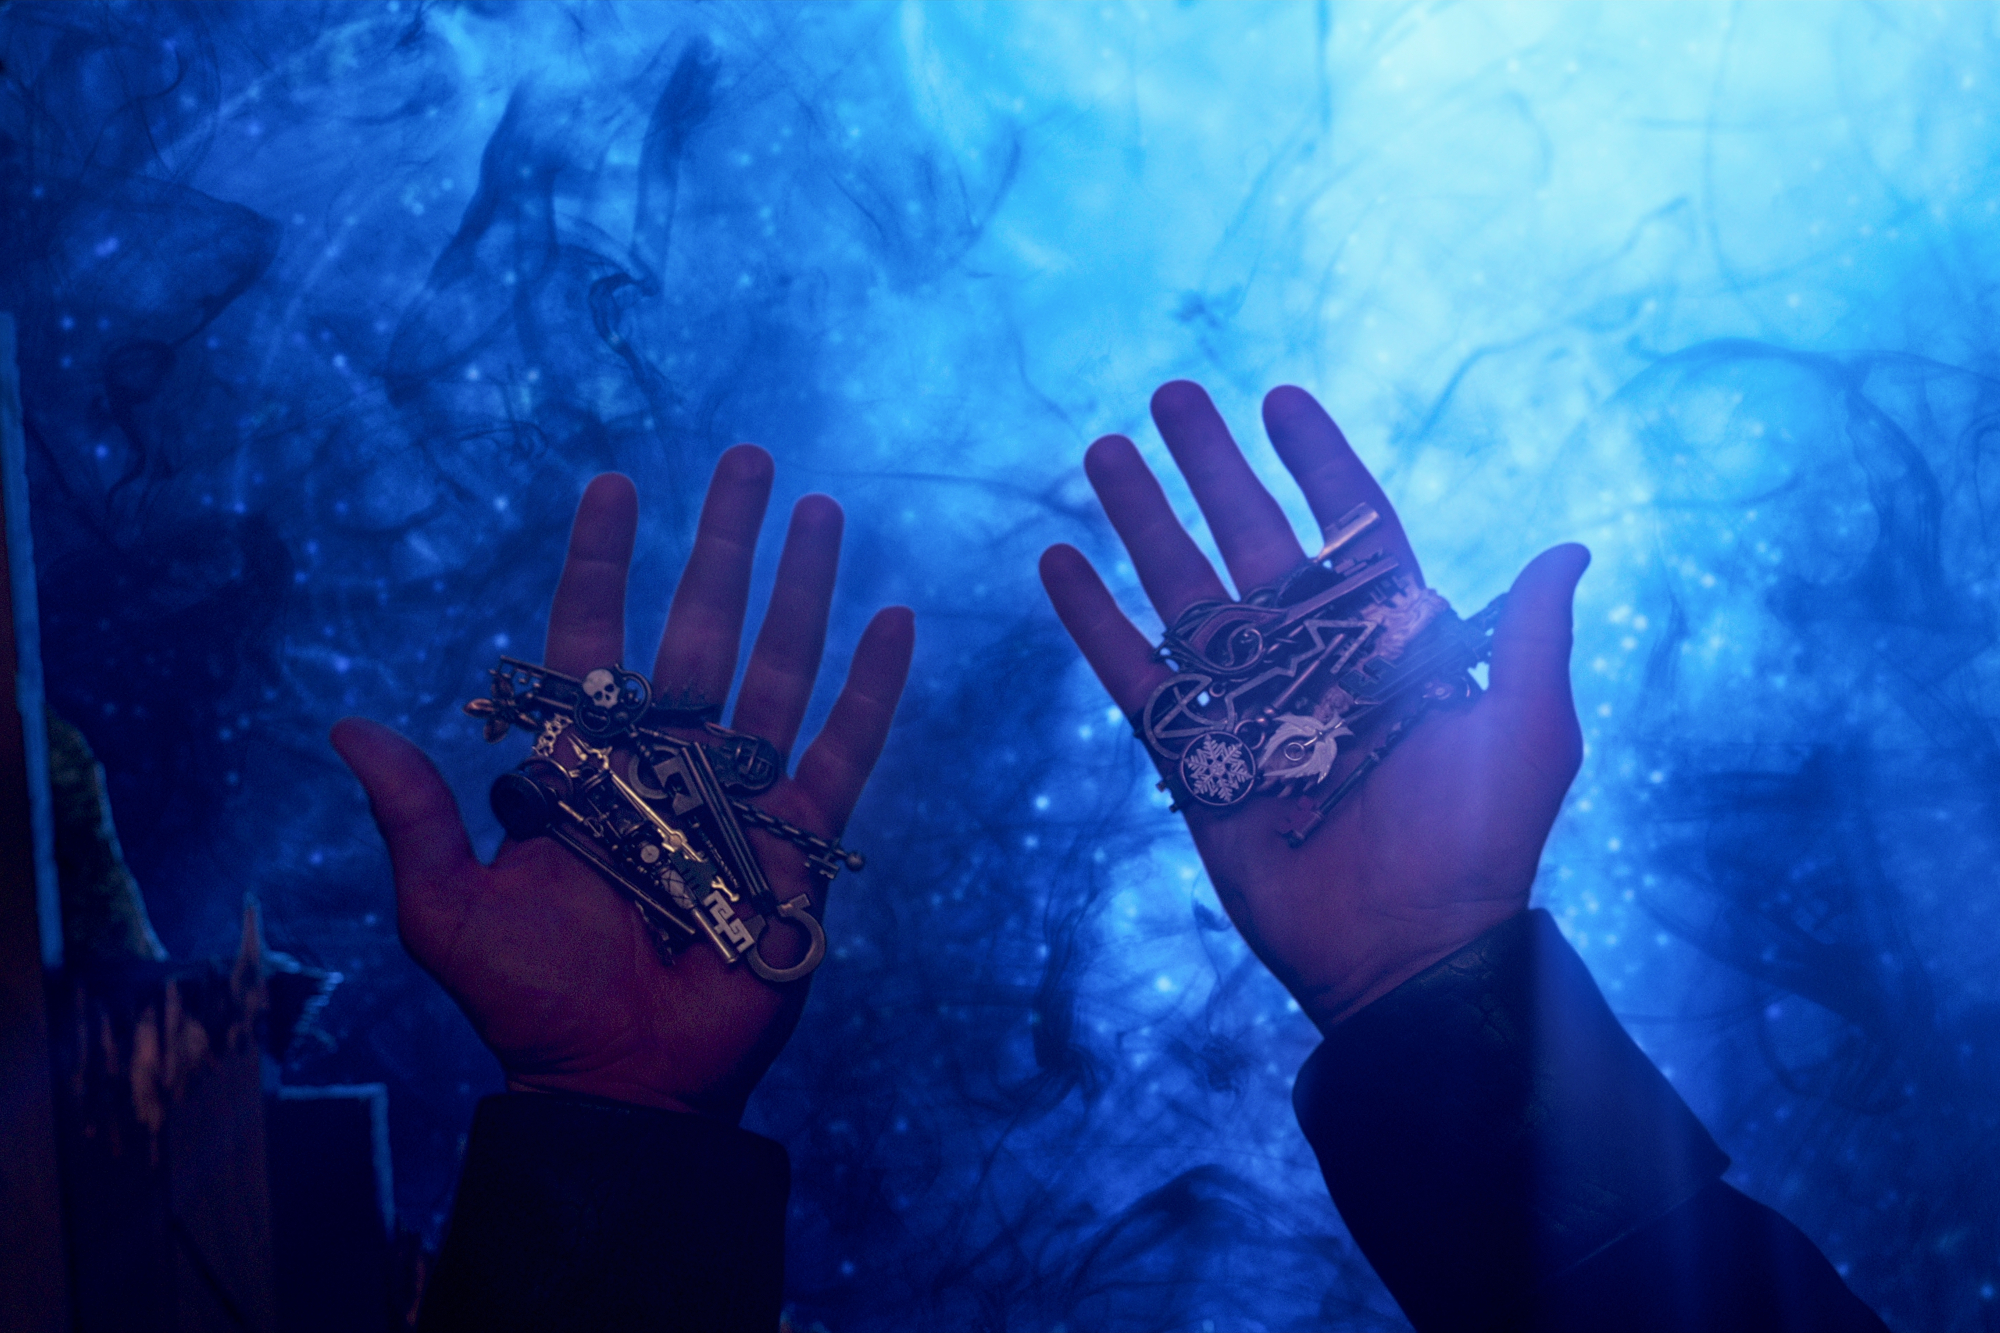 All of the Keys, including the Echo Key, in 'Locke & Key' Season 3. Someone is holding them in their hands, and there's blue light in the background.